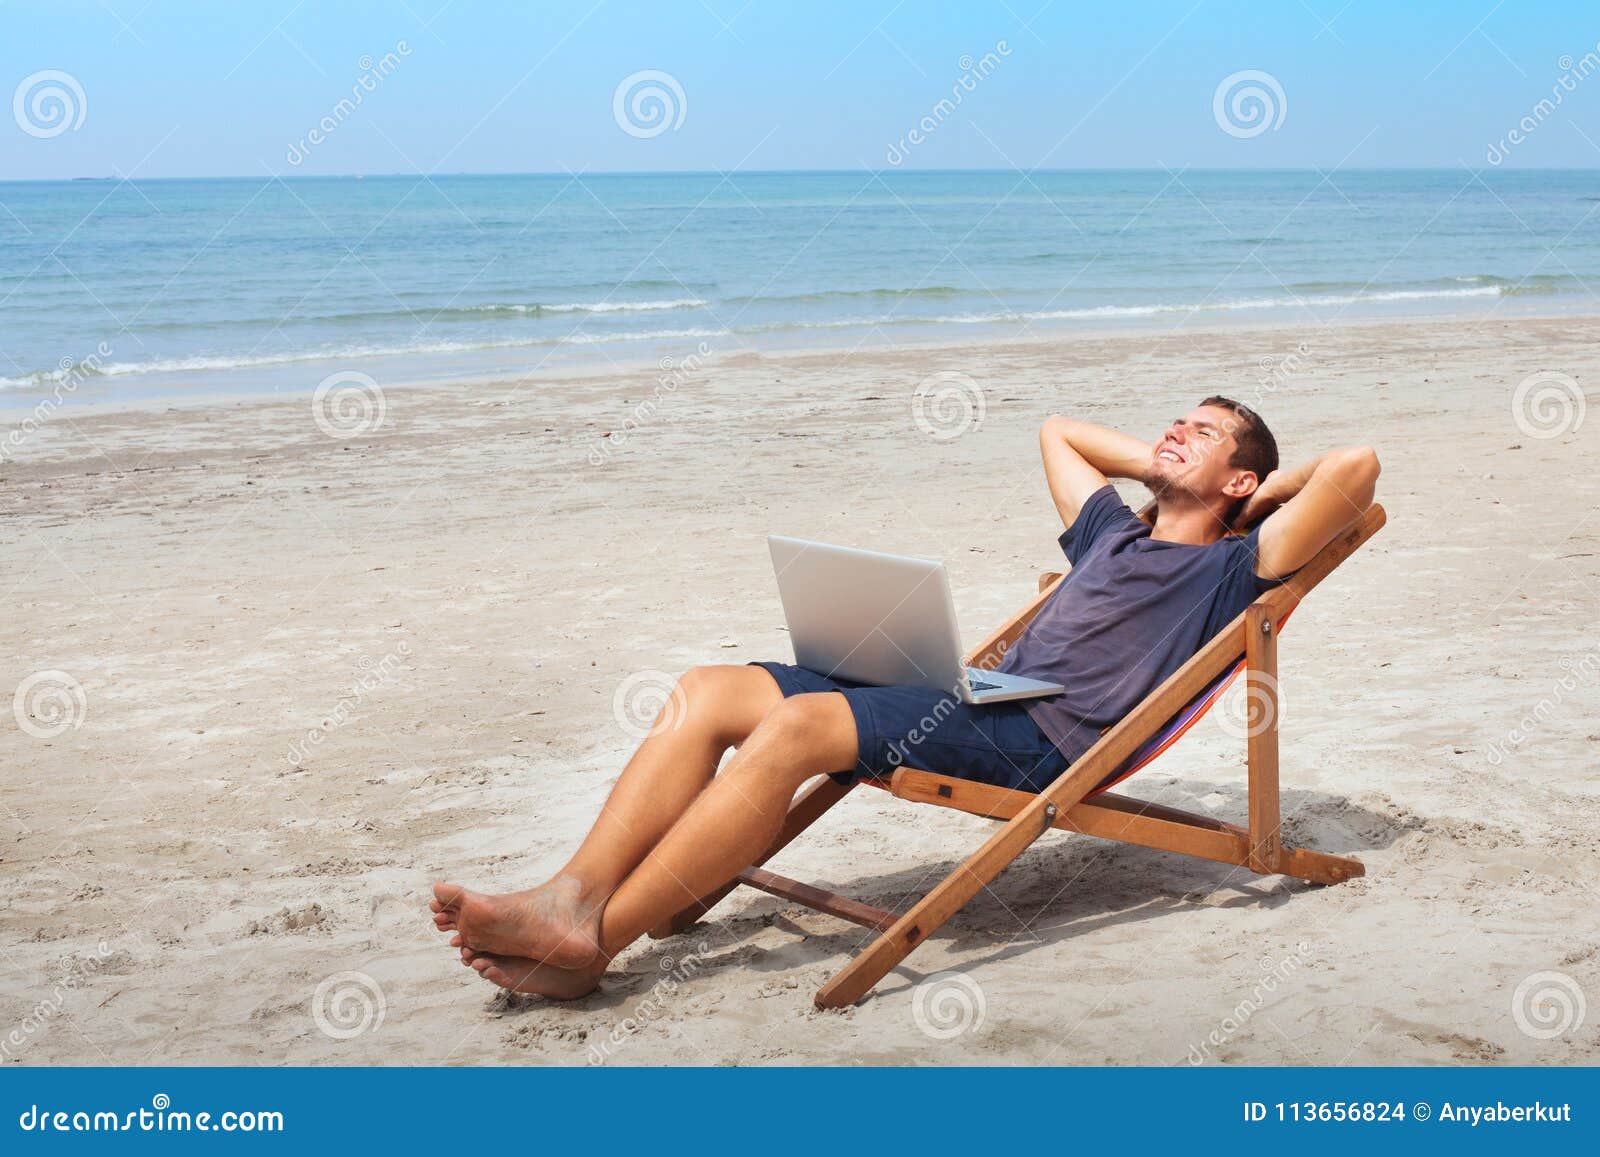 freelancer with laptop on the beach, successful happy business man relaxing